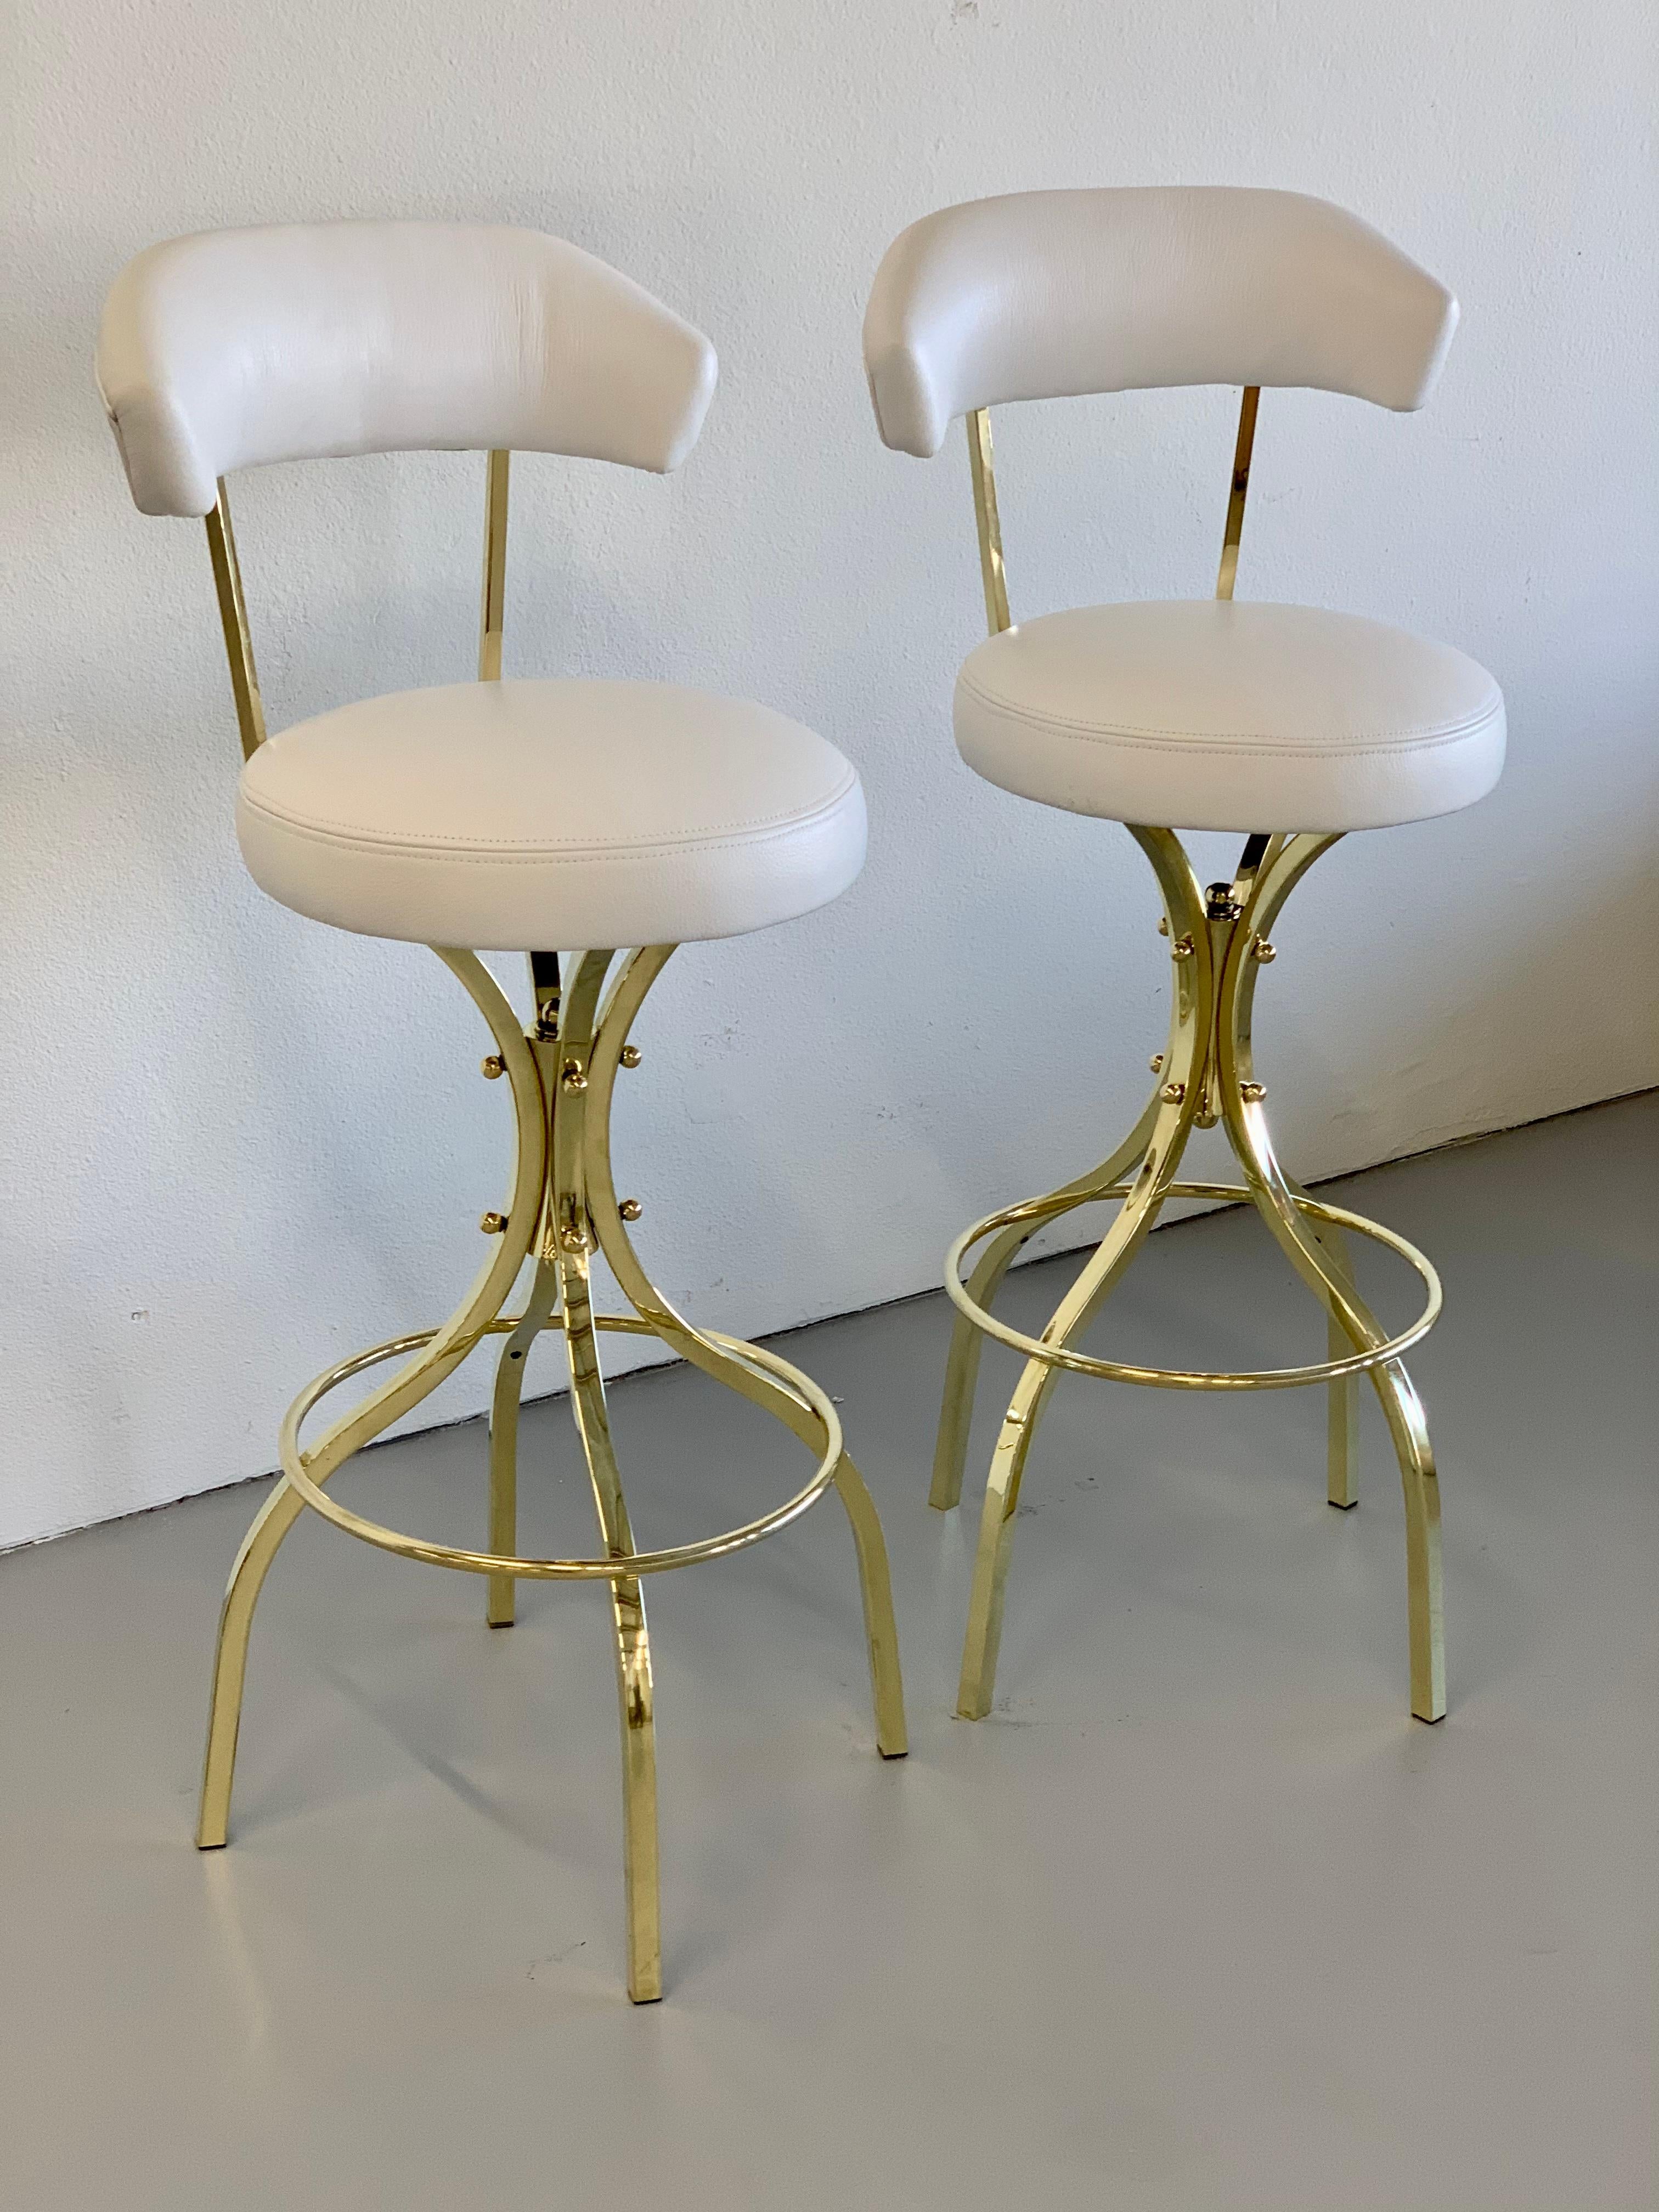 A vintage pair of brass and leather bar stools by Charles Hollis Jones. These are his 